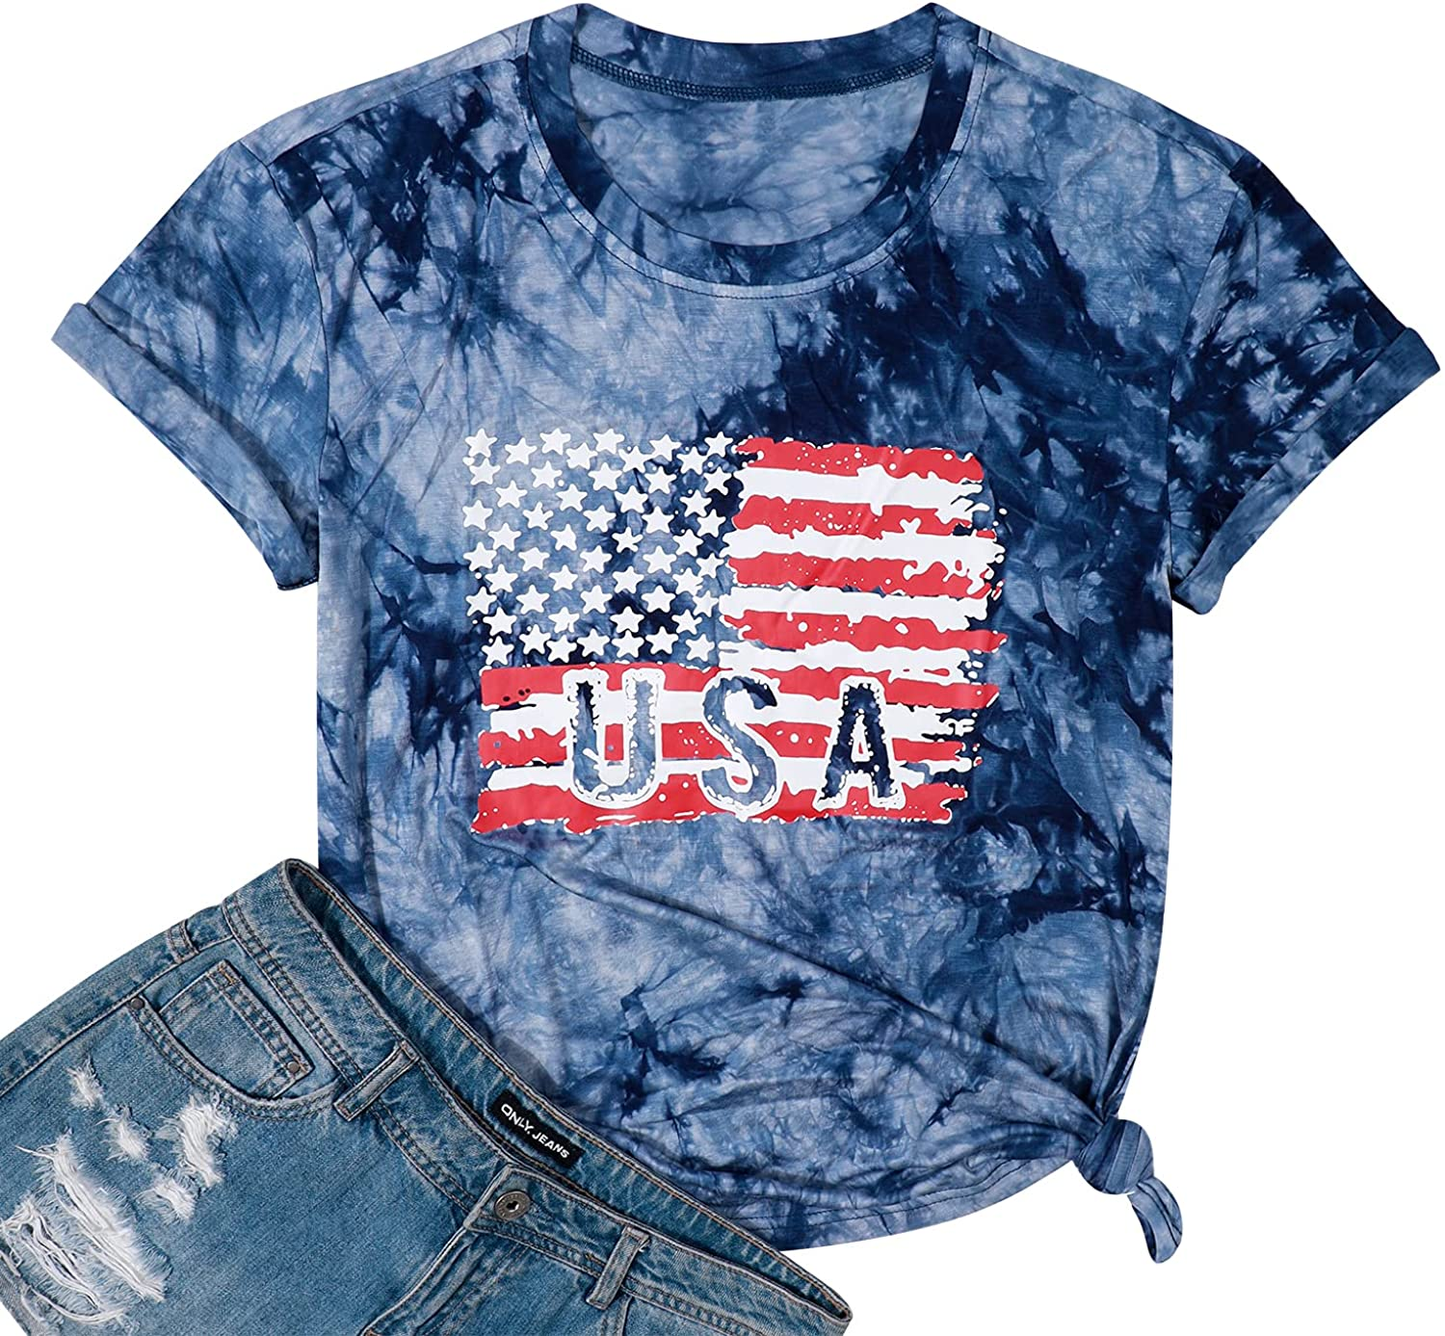 Women American Flag Shirt USA 4Th of July Independence Day T-Shirt Patriotic Stars Stripes Short Sleeve Tee Tops